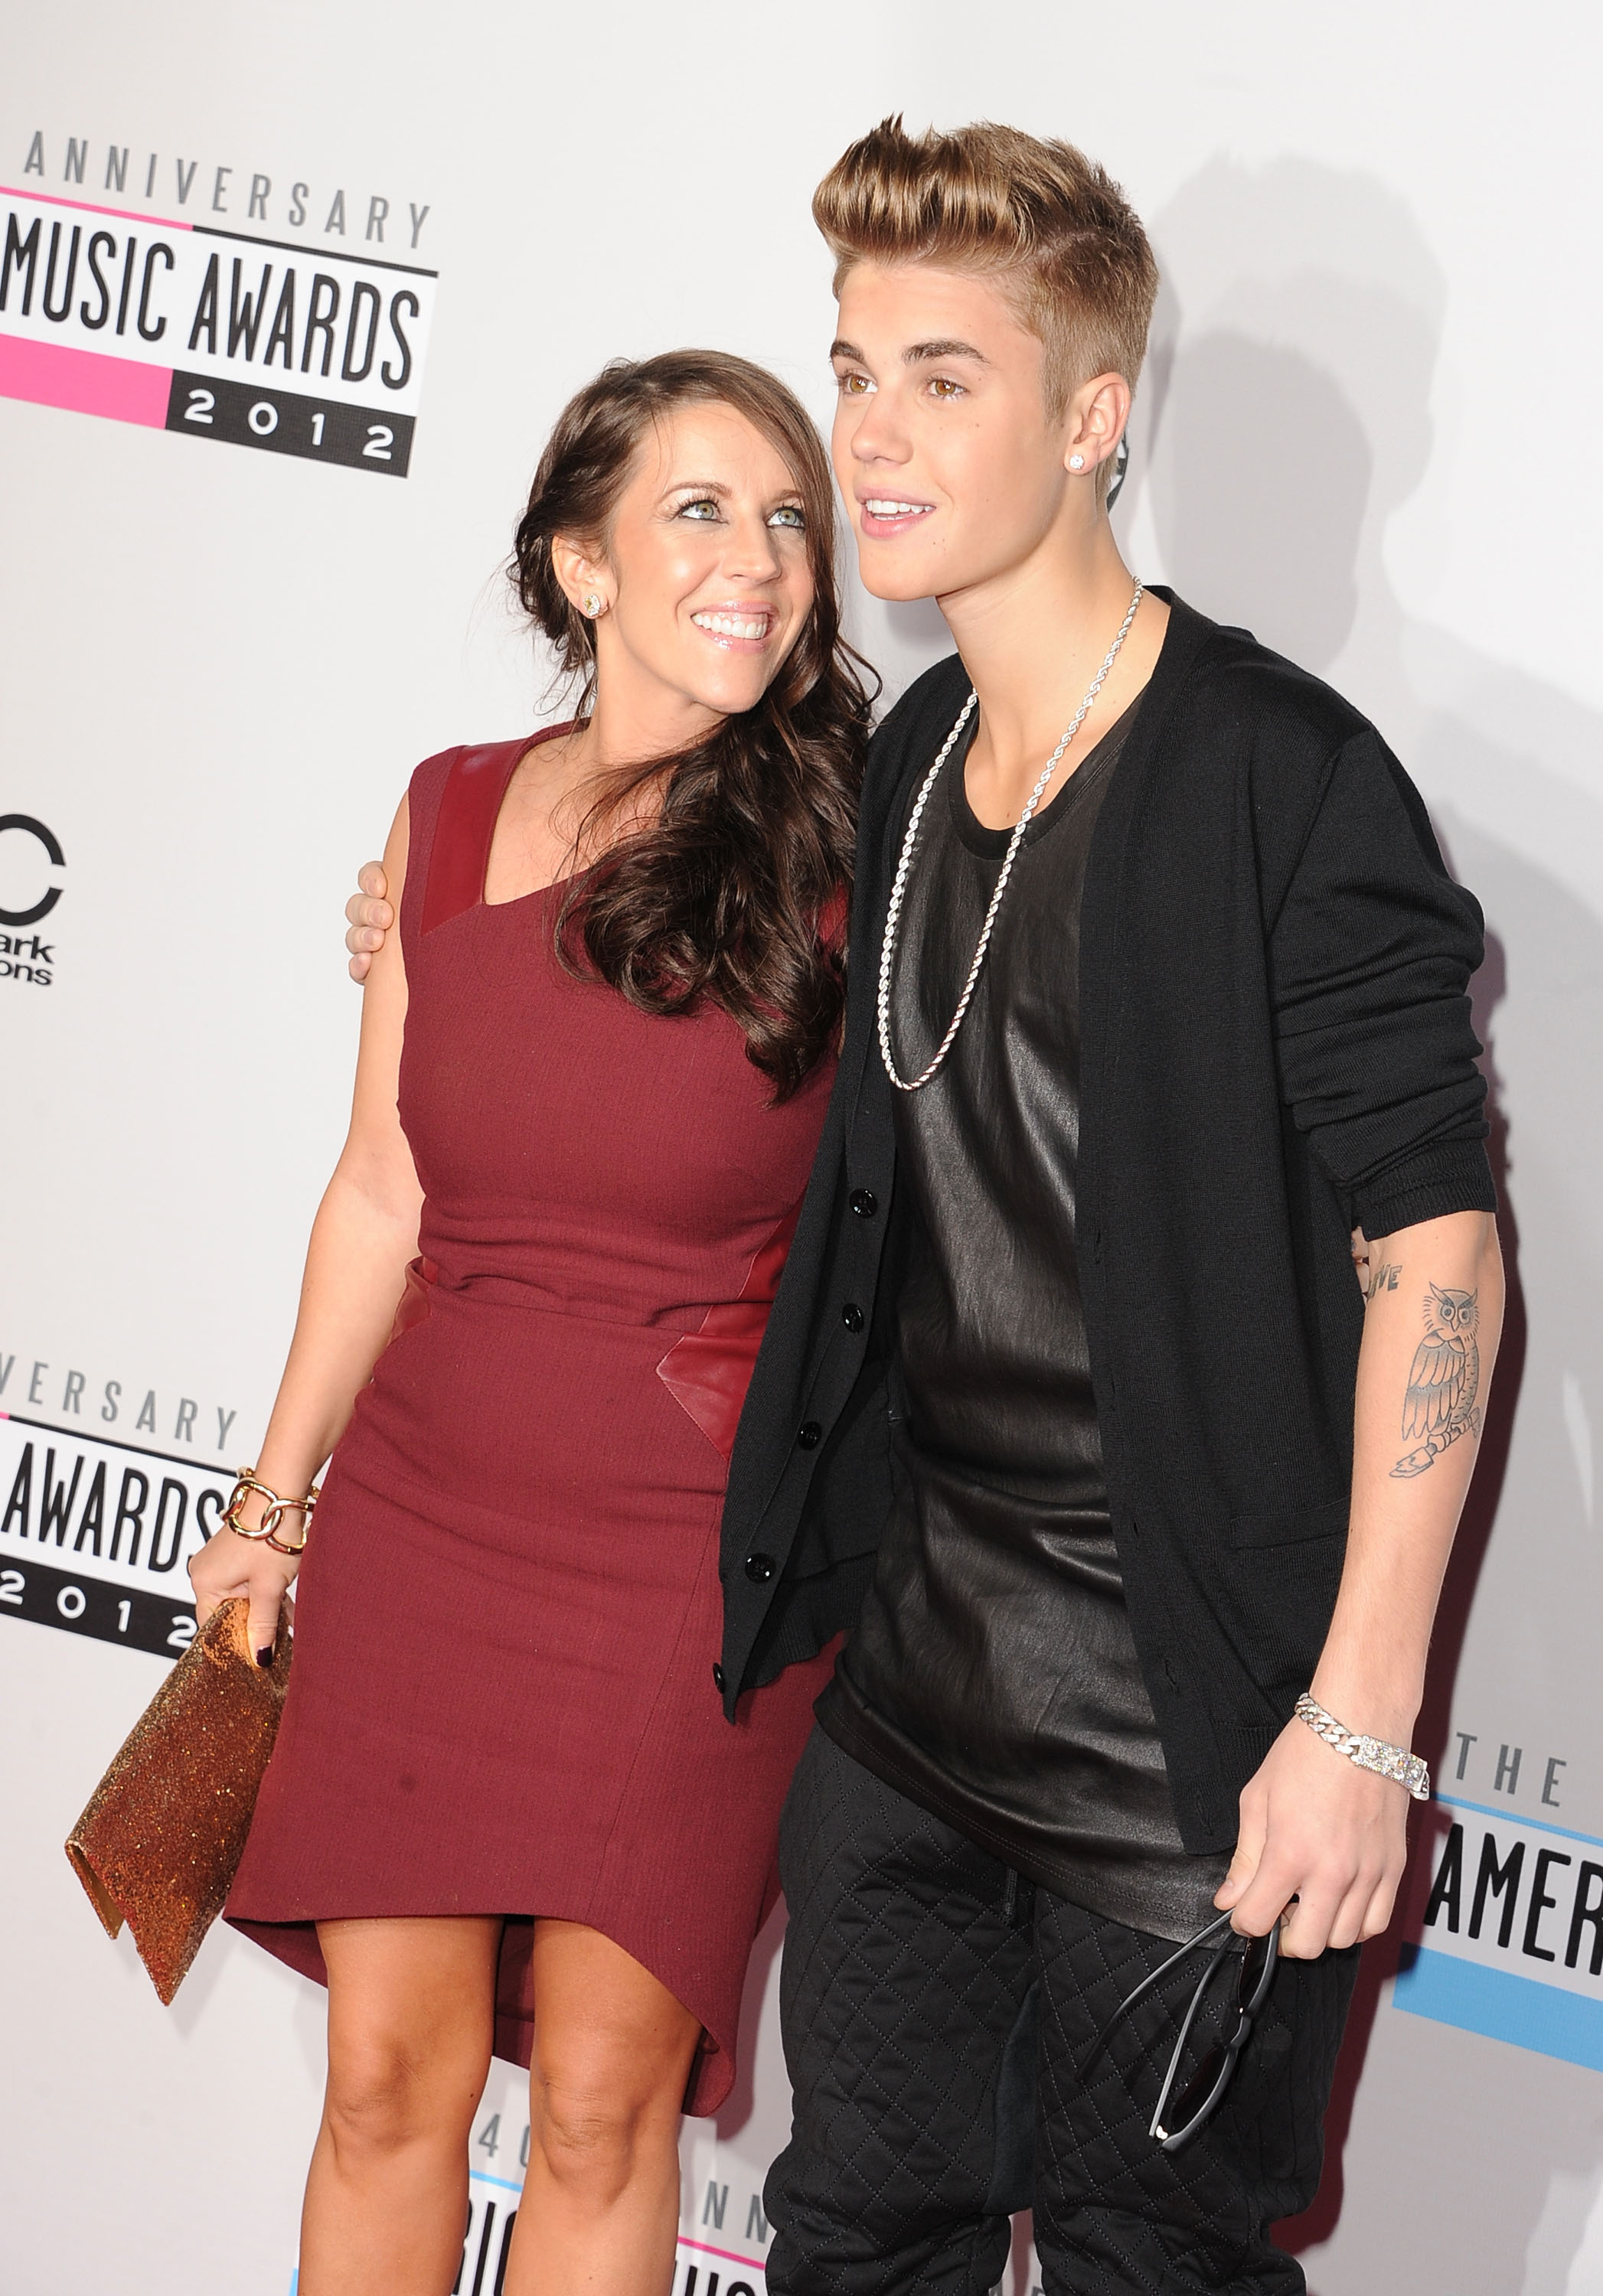 Justin Bieber and Pattie Mallette attend the 40th Anniversary of the American Music Awards held in Los Angeles, California, on November 18, 2012. | Source: Getty Images